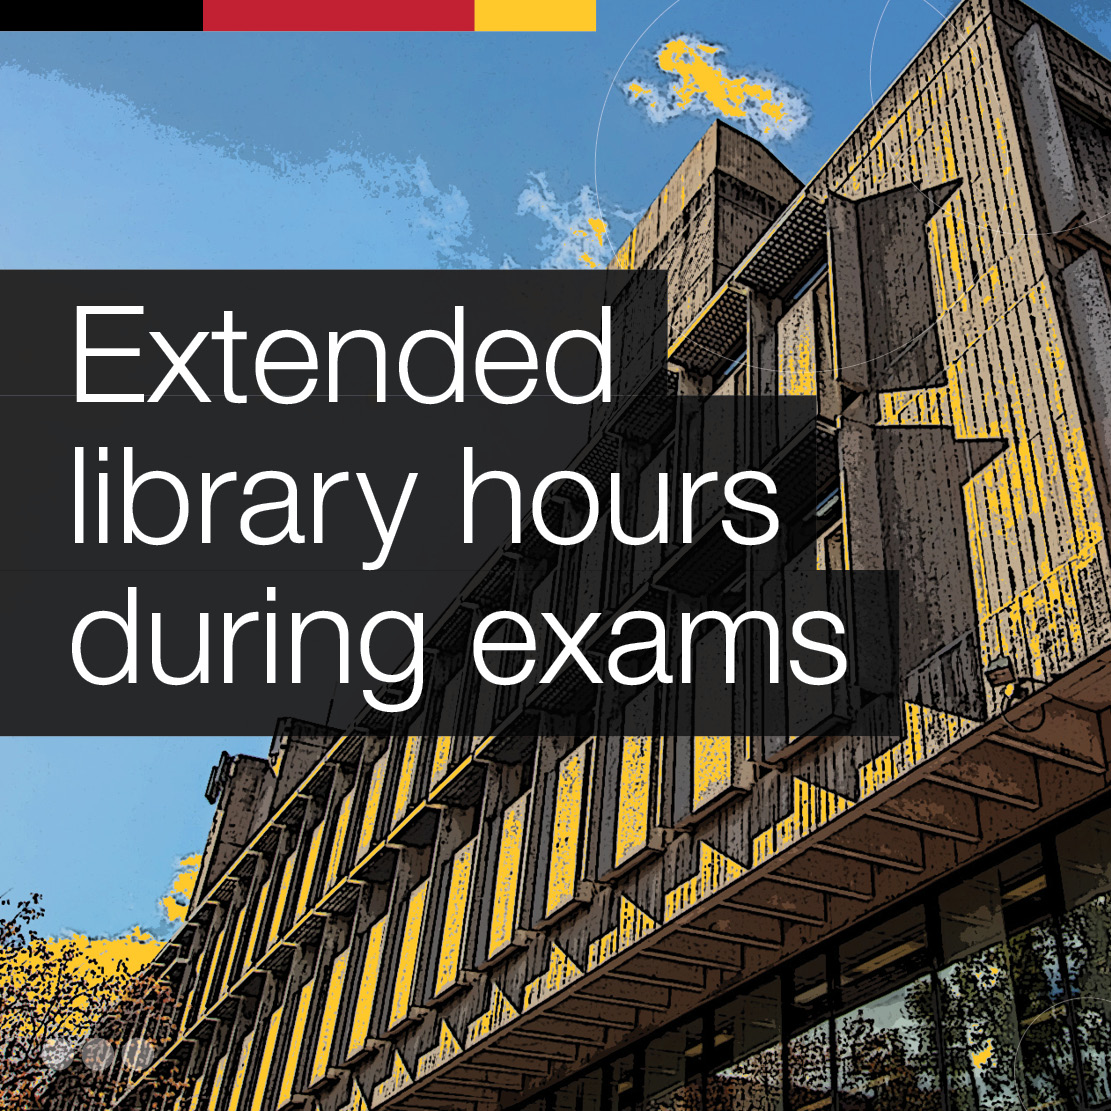 Extended library hours during exams.